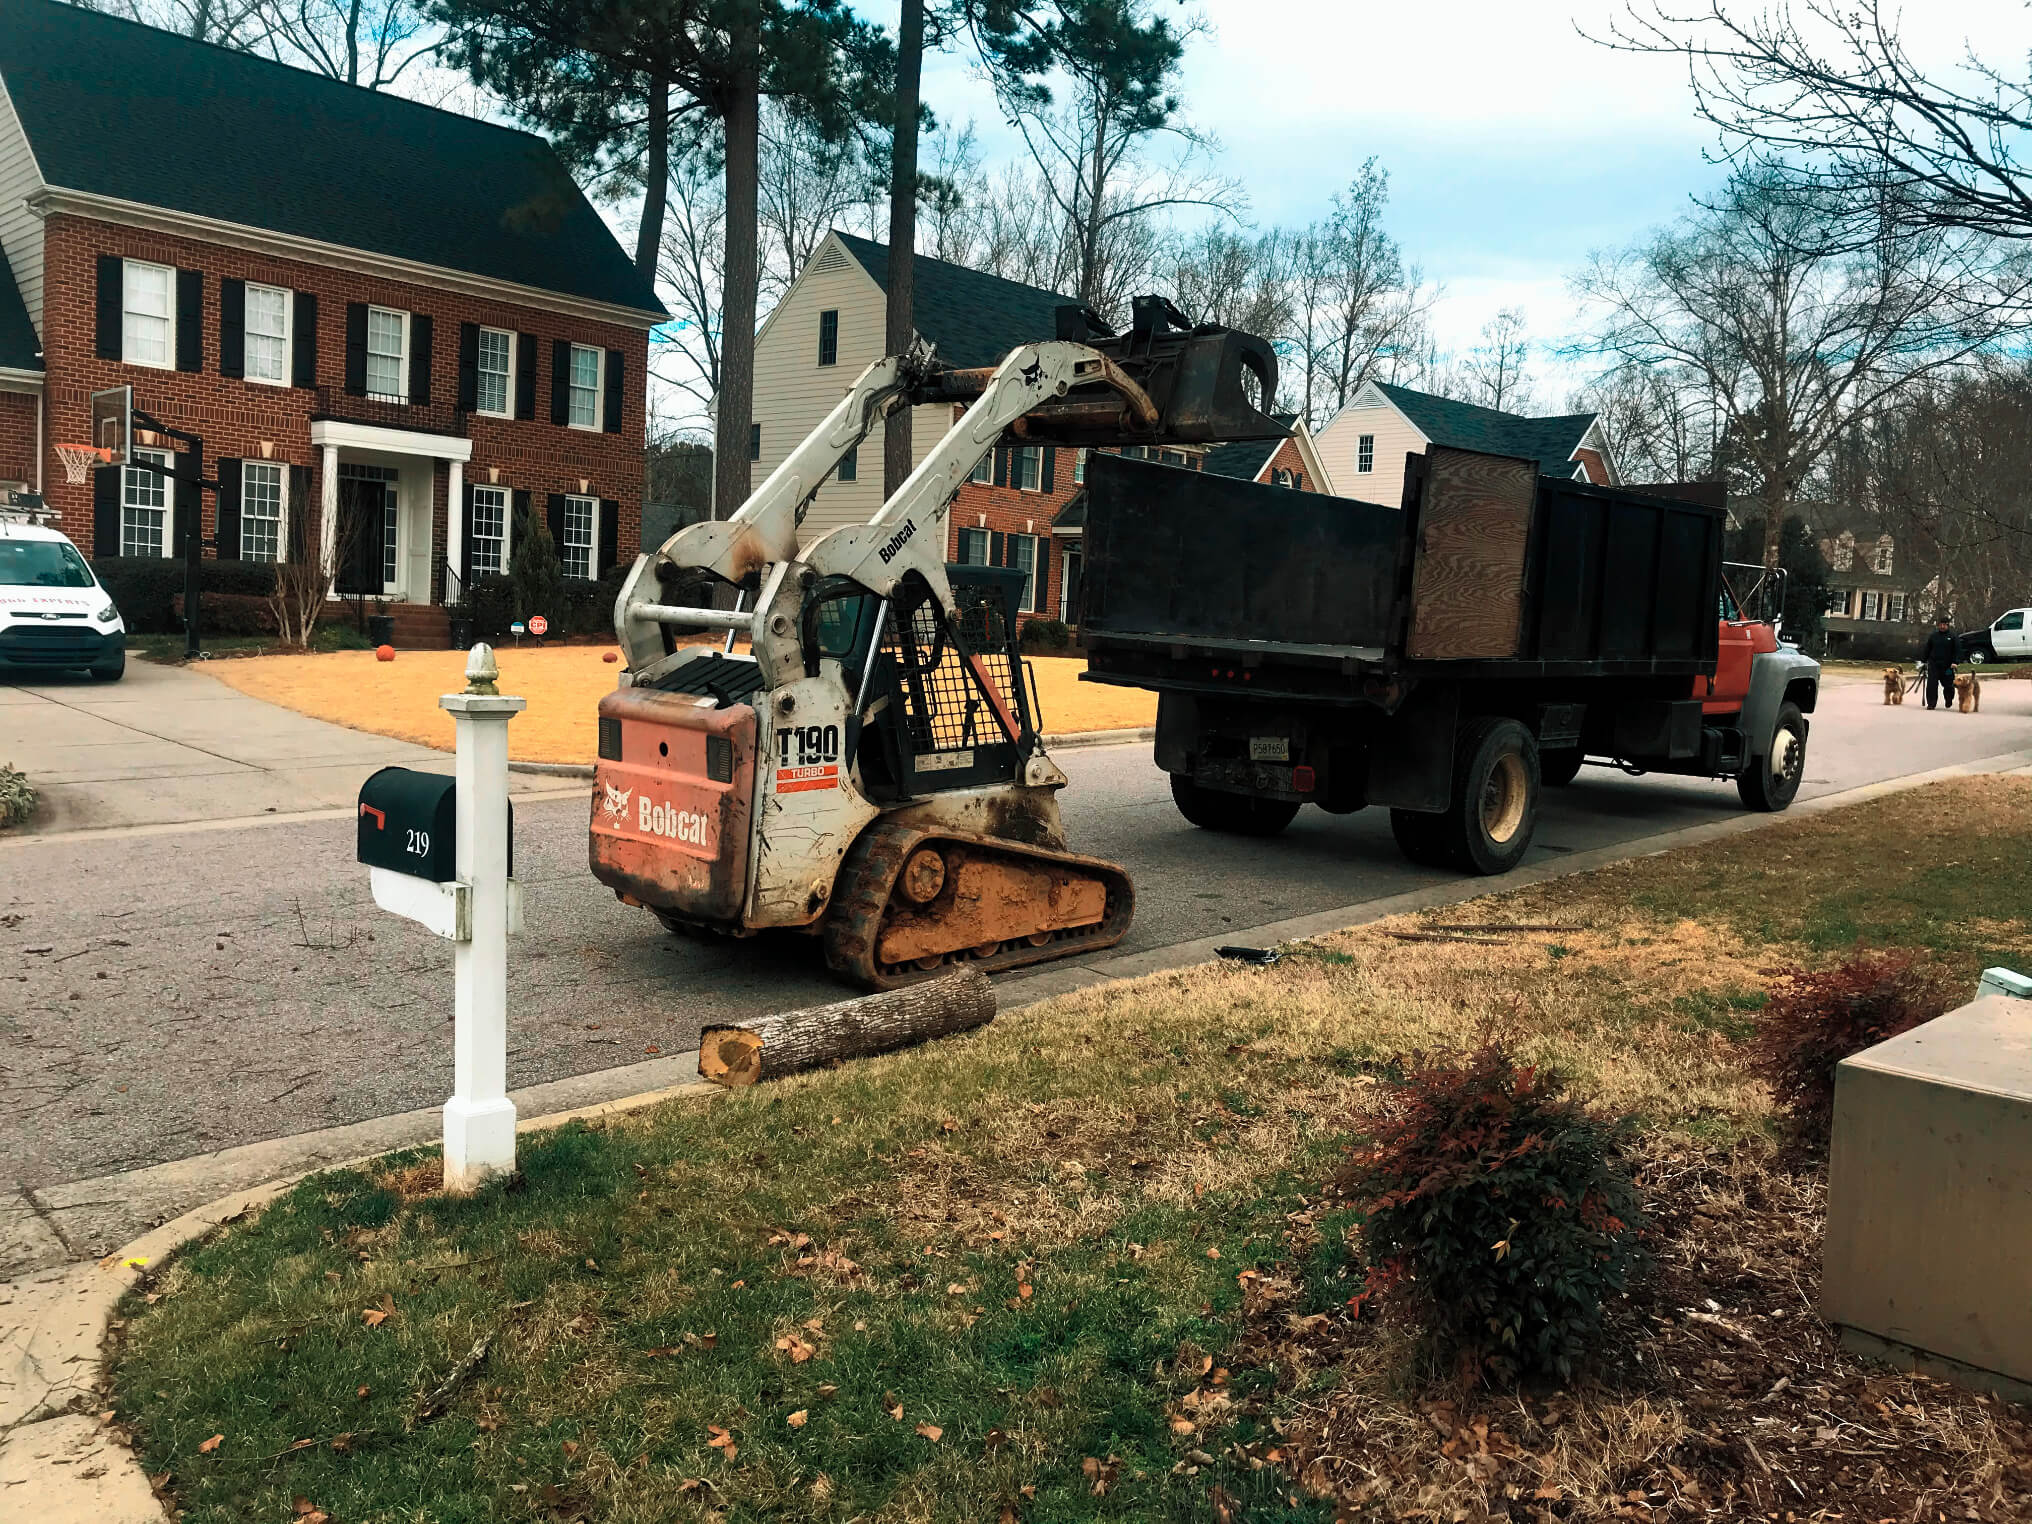 Cary tree service working